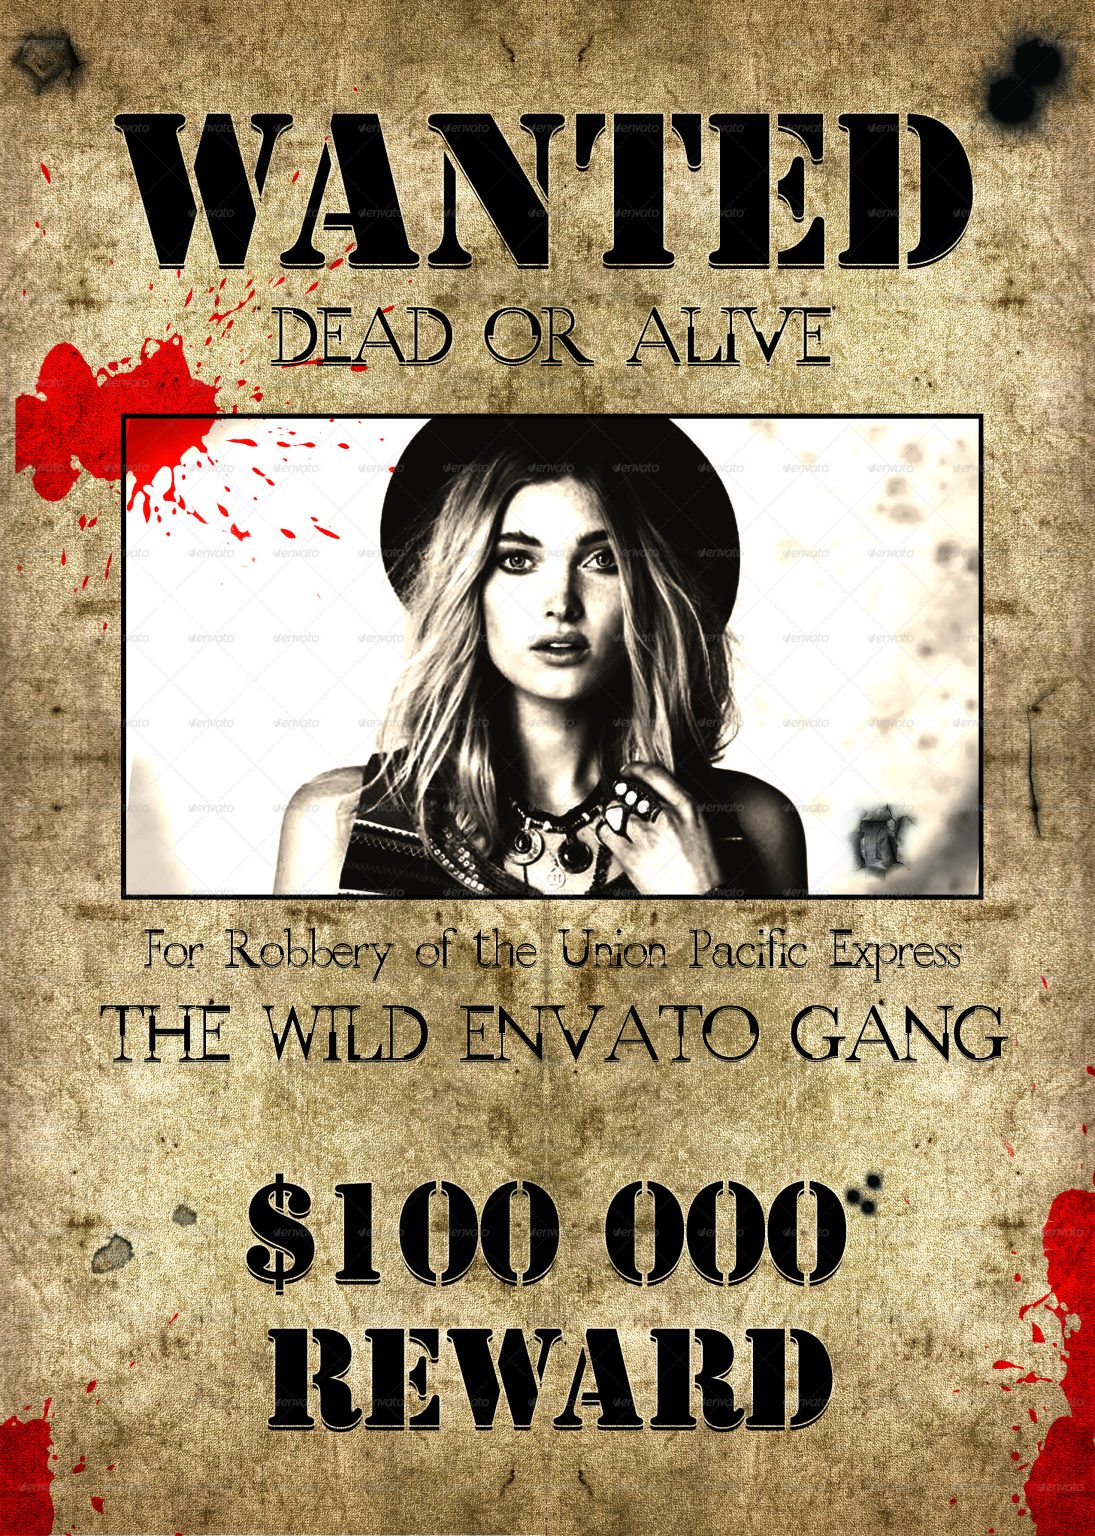 15+ Best Wanted Poster Templates PSD Download - PSD Templates Blog
 Best Poster Templates